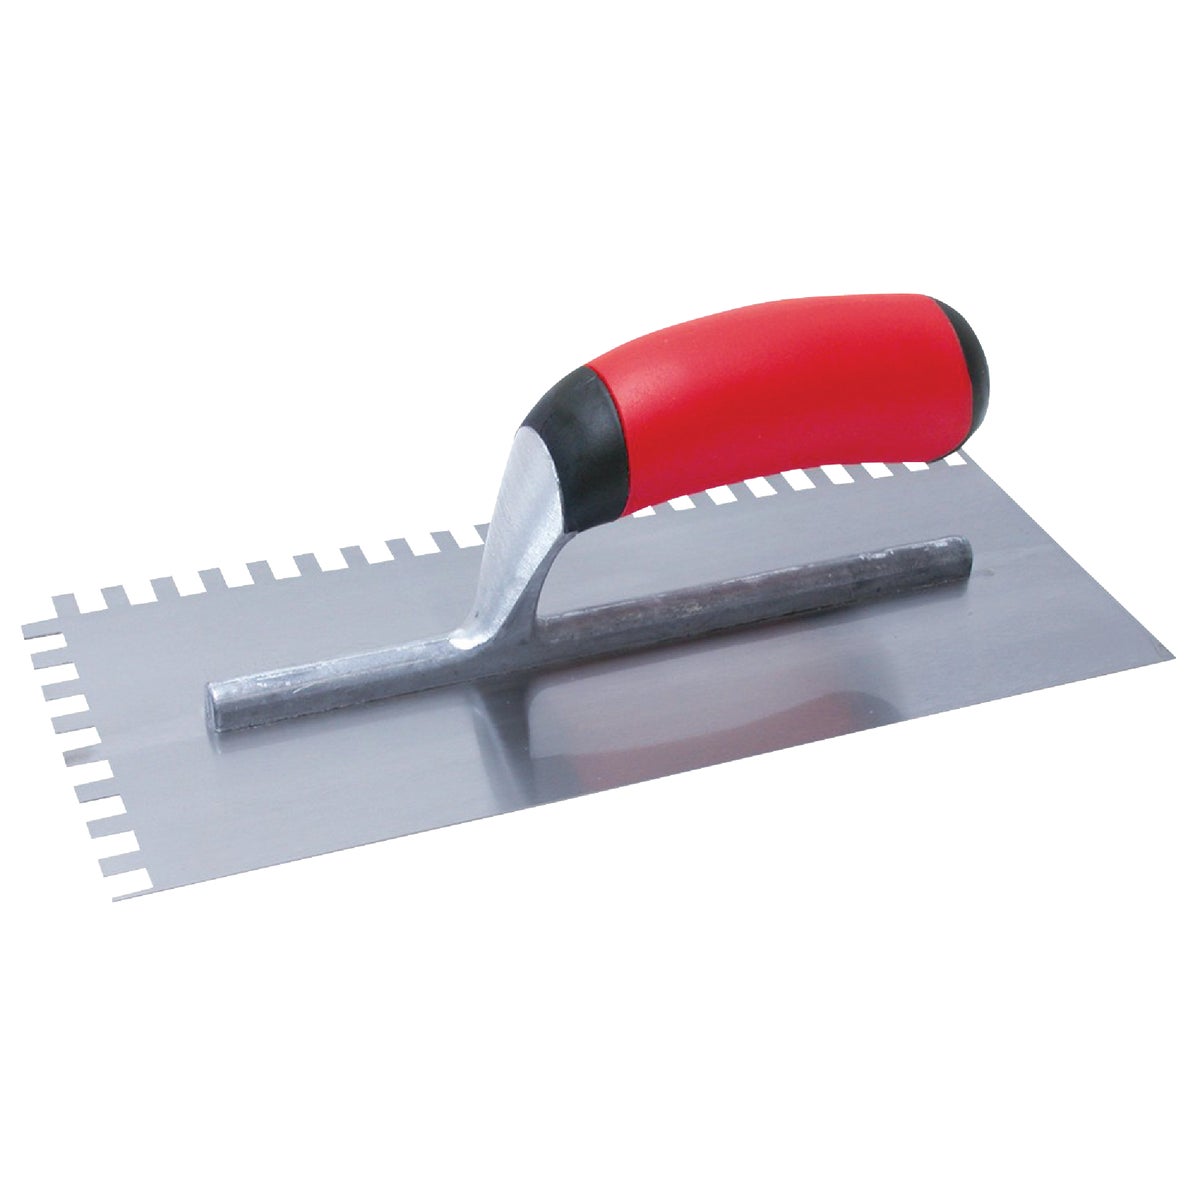 Item 313831, Aluminum alloy mounting riveted to a hard tempered steel blade.